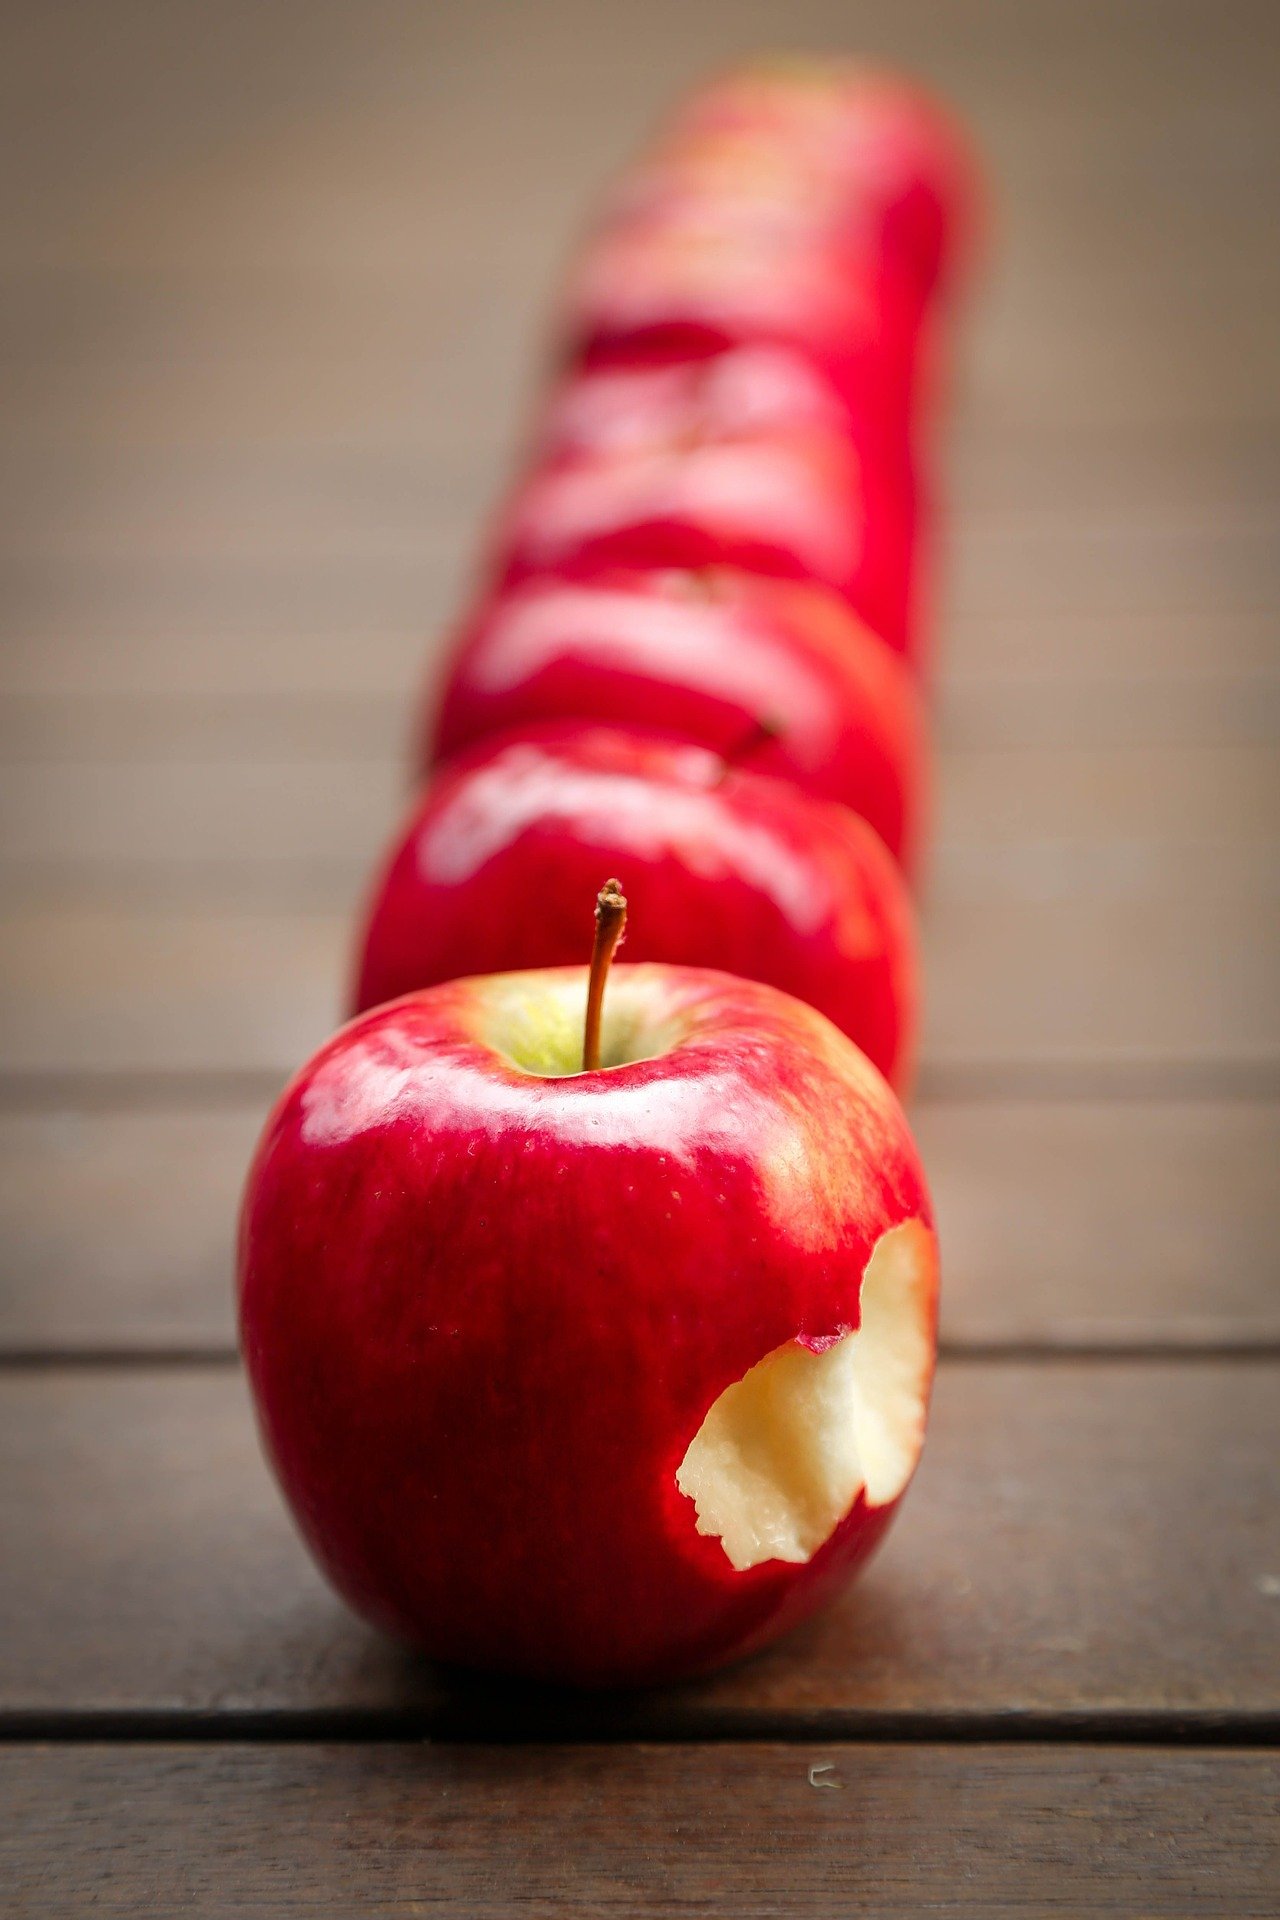 Apples placed on a table in a straight line with the first one featuring bite marks | Photo: Pixabay/Tracy Lundgren